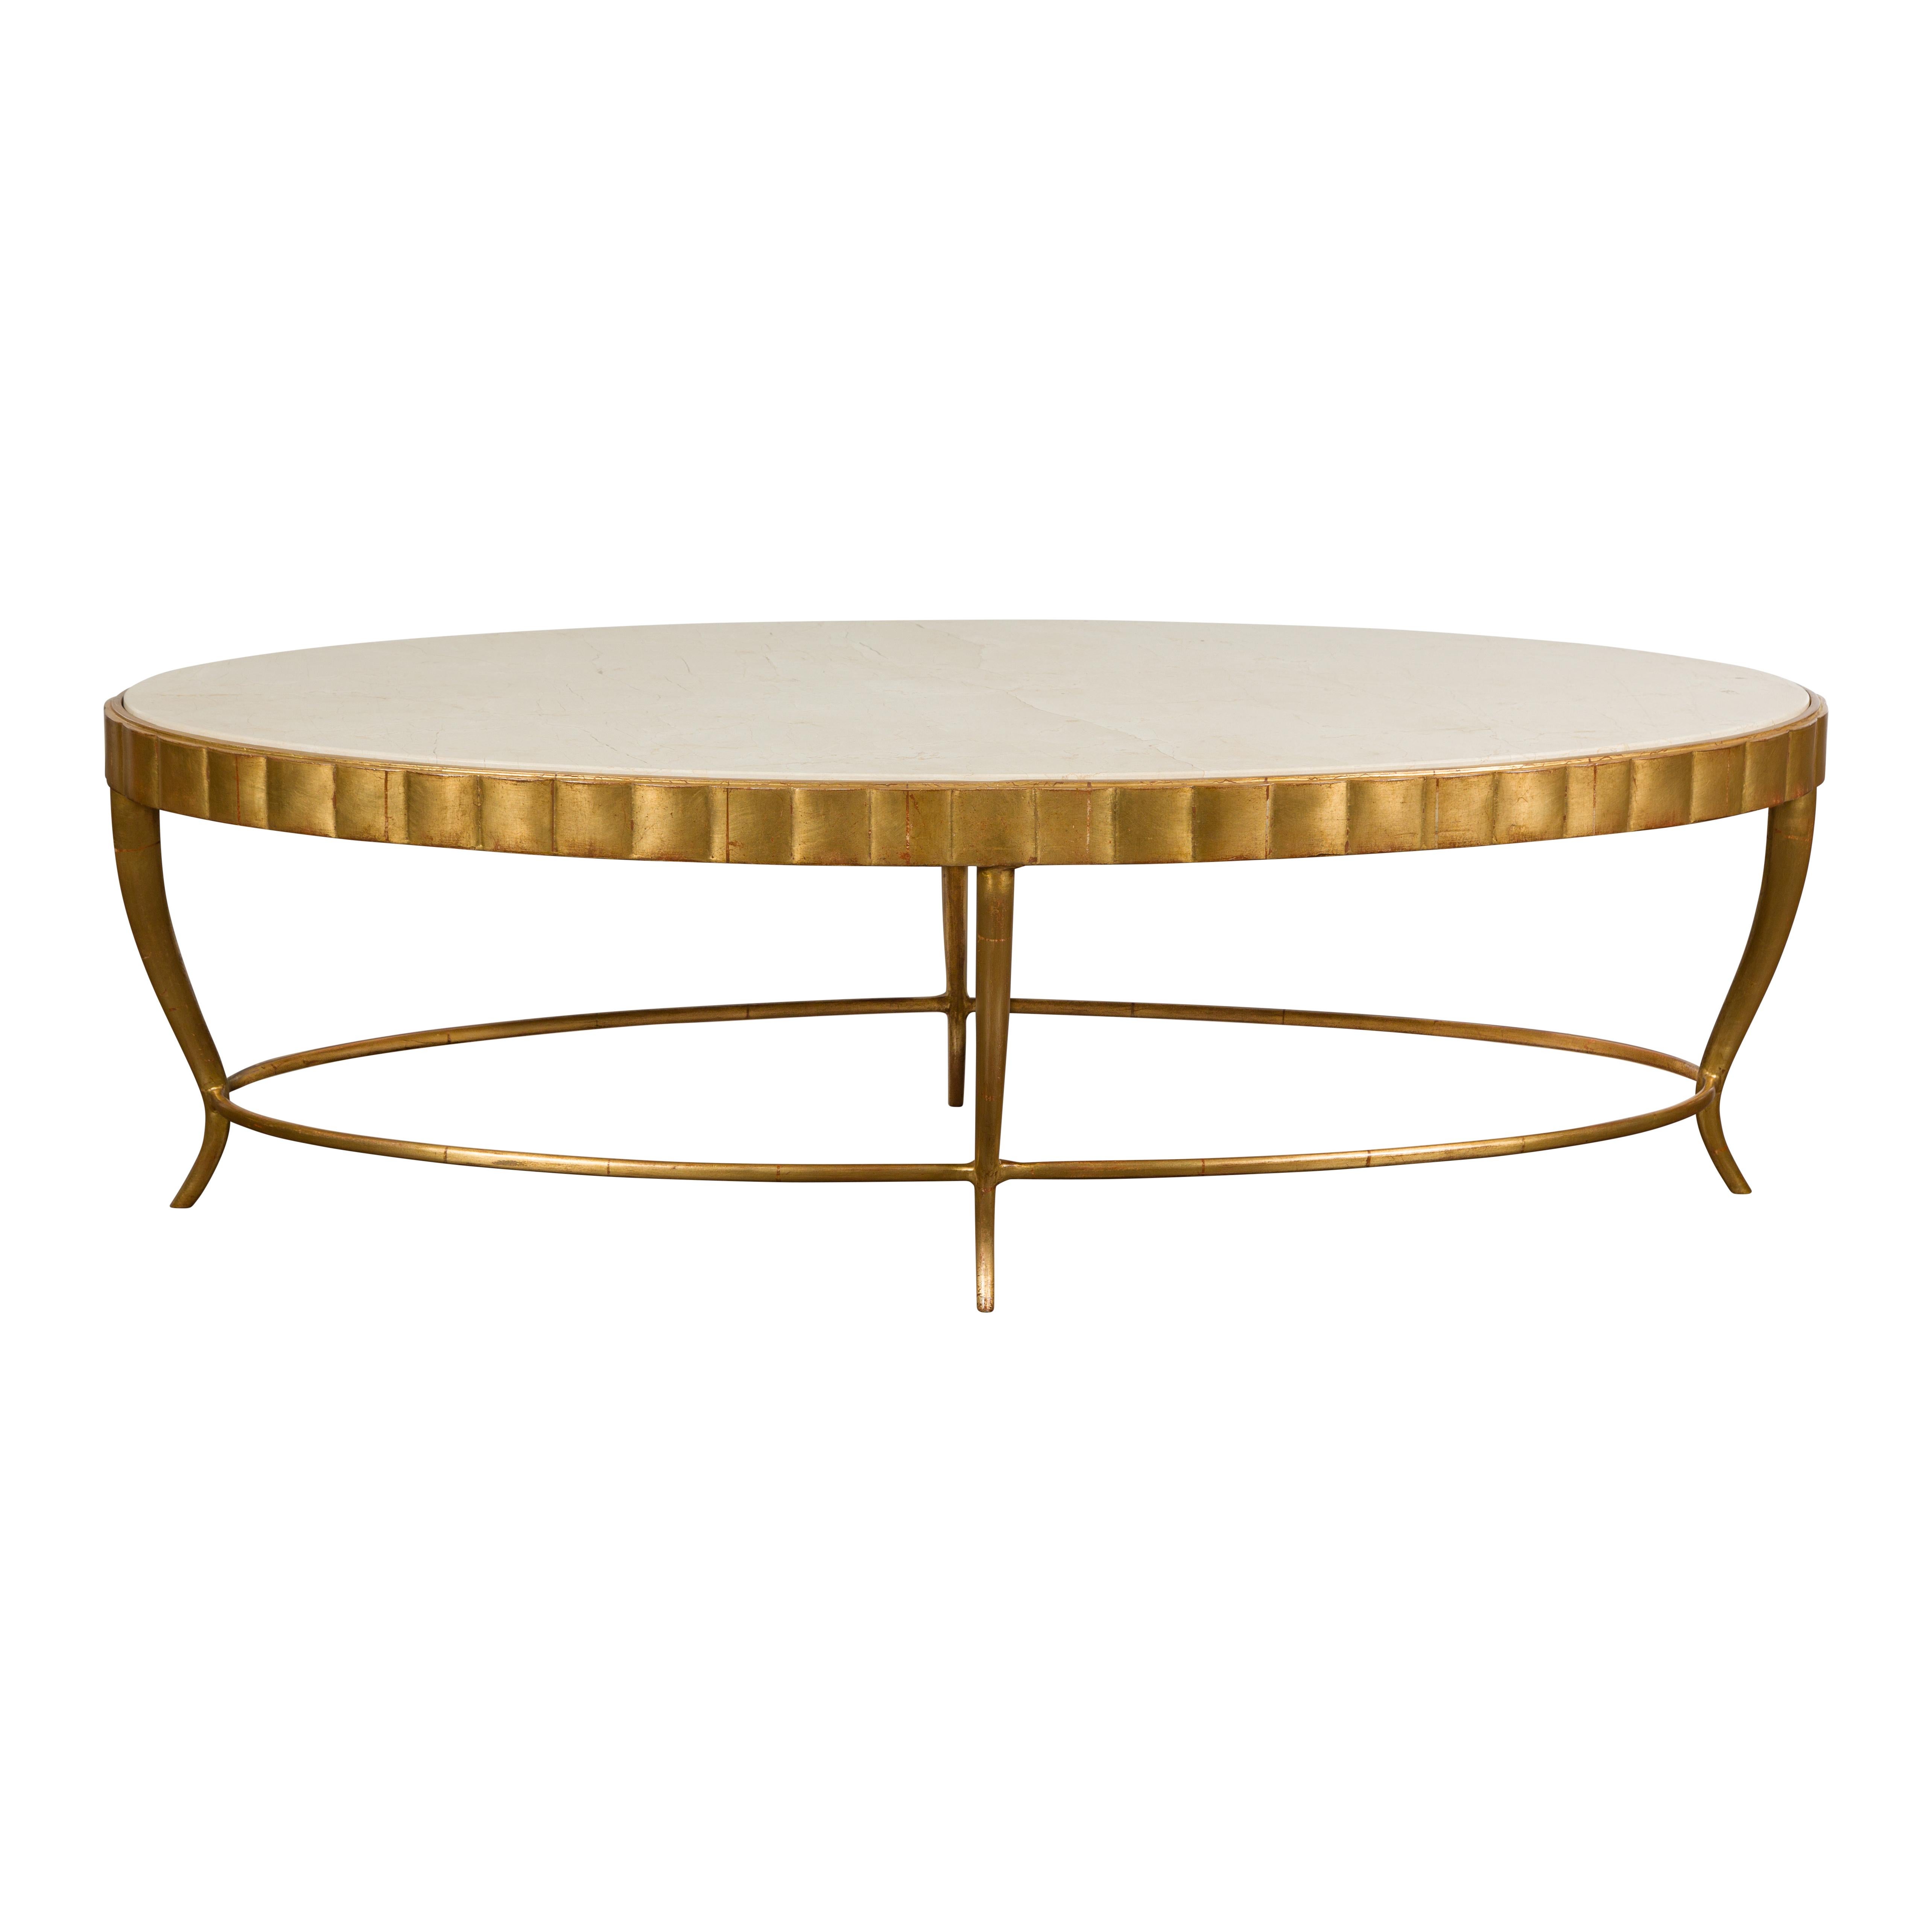 An Italian Midcentury gilt metal oval coffee table with cream colored marble top, reeded apron, curving legs and oval side stretcher. Add a touch of Midcentury elegance to your living space with this Italian gilt metal oval coffee table. Crafted